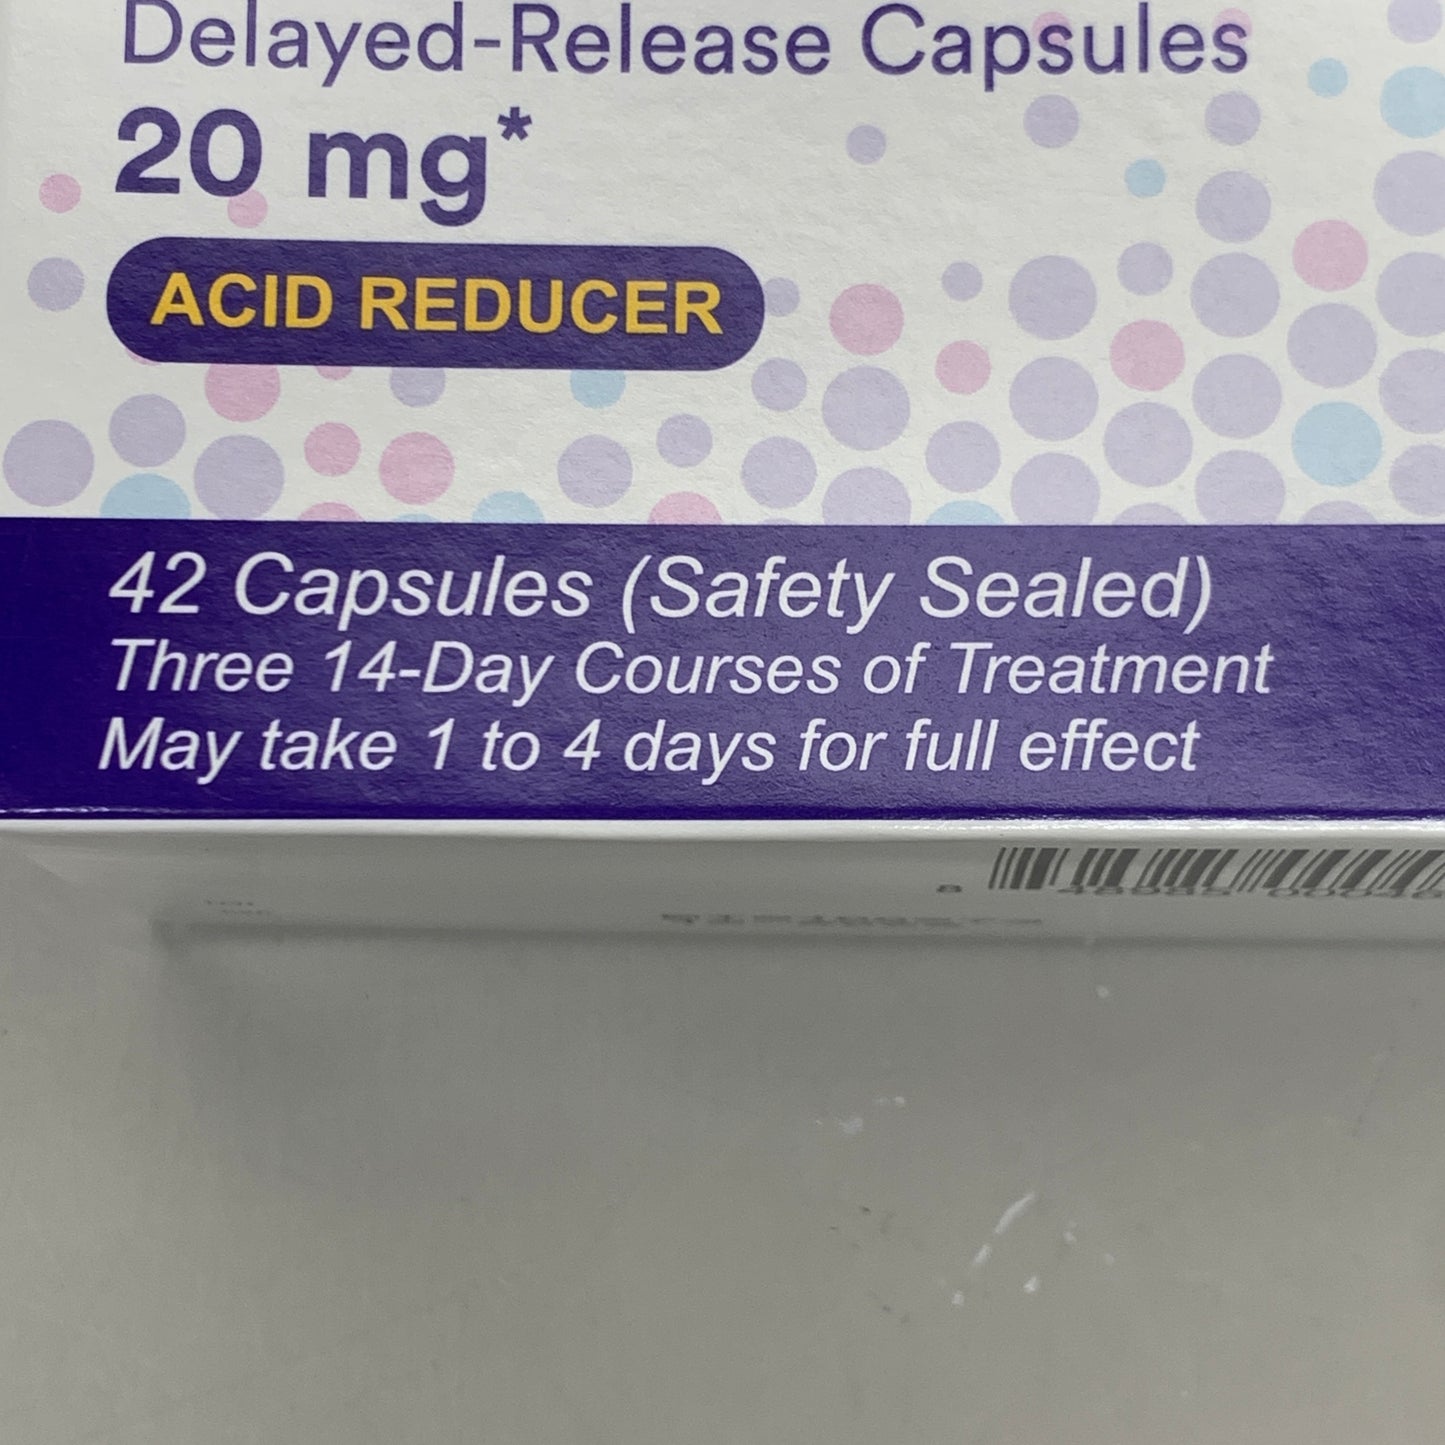 ZA@ DR.REDDY'S 6 BOXES! (18 Bottles) Omeprazole 20 mg Acid Reducer 756 CAPSULES (AS-IS)